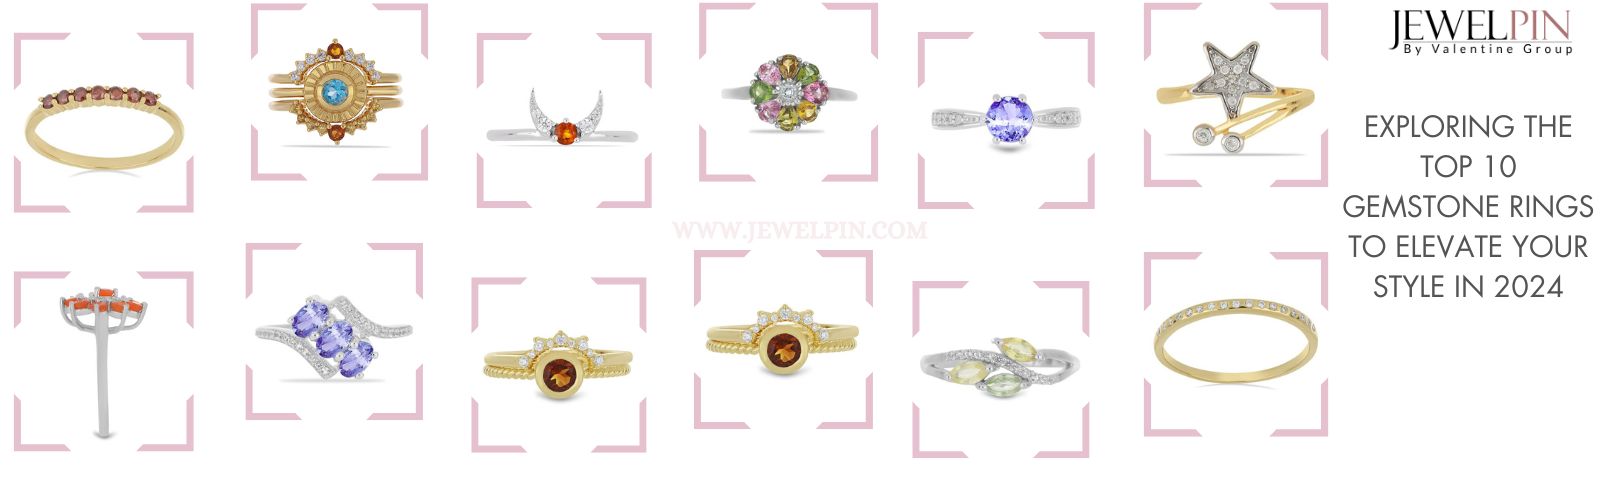 exploring the top 10 gemstone rings to elevate your style in 2024